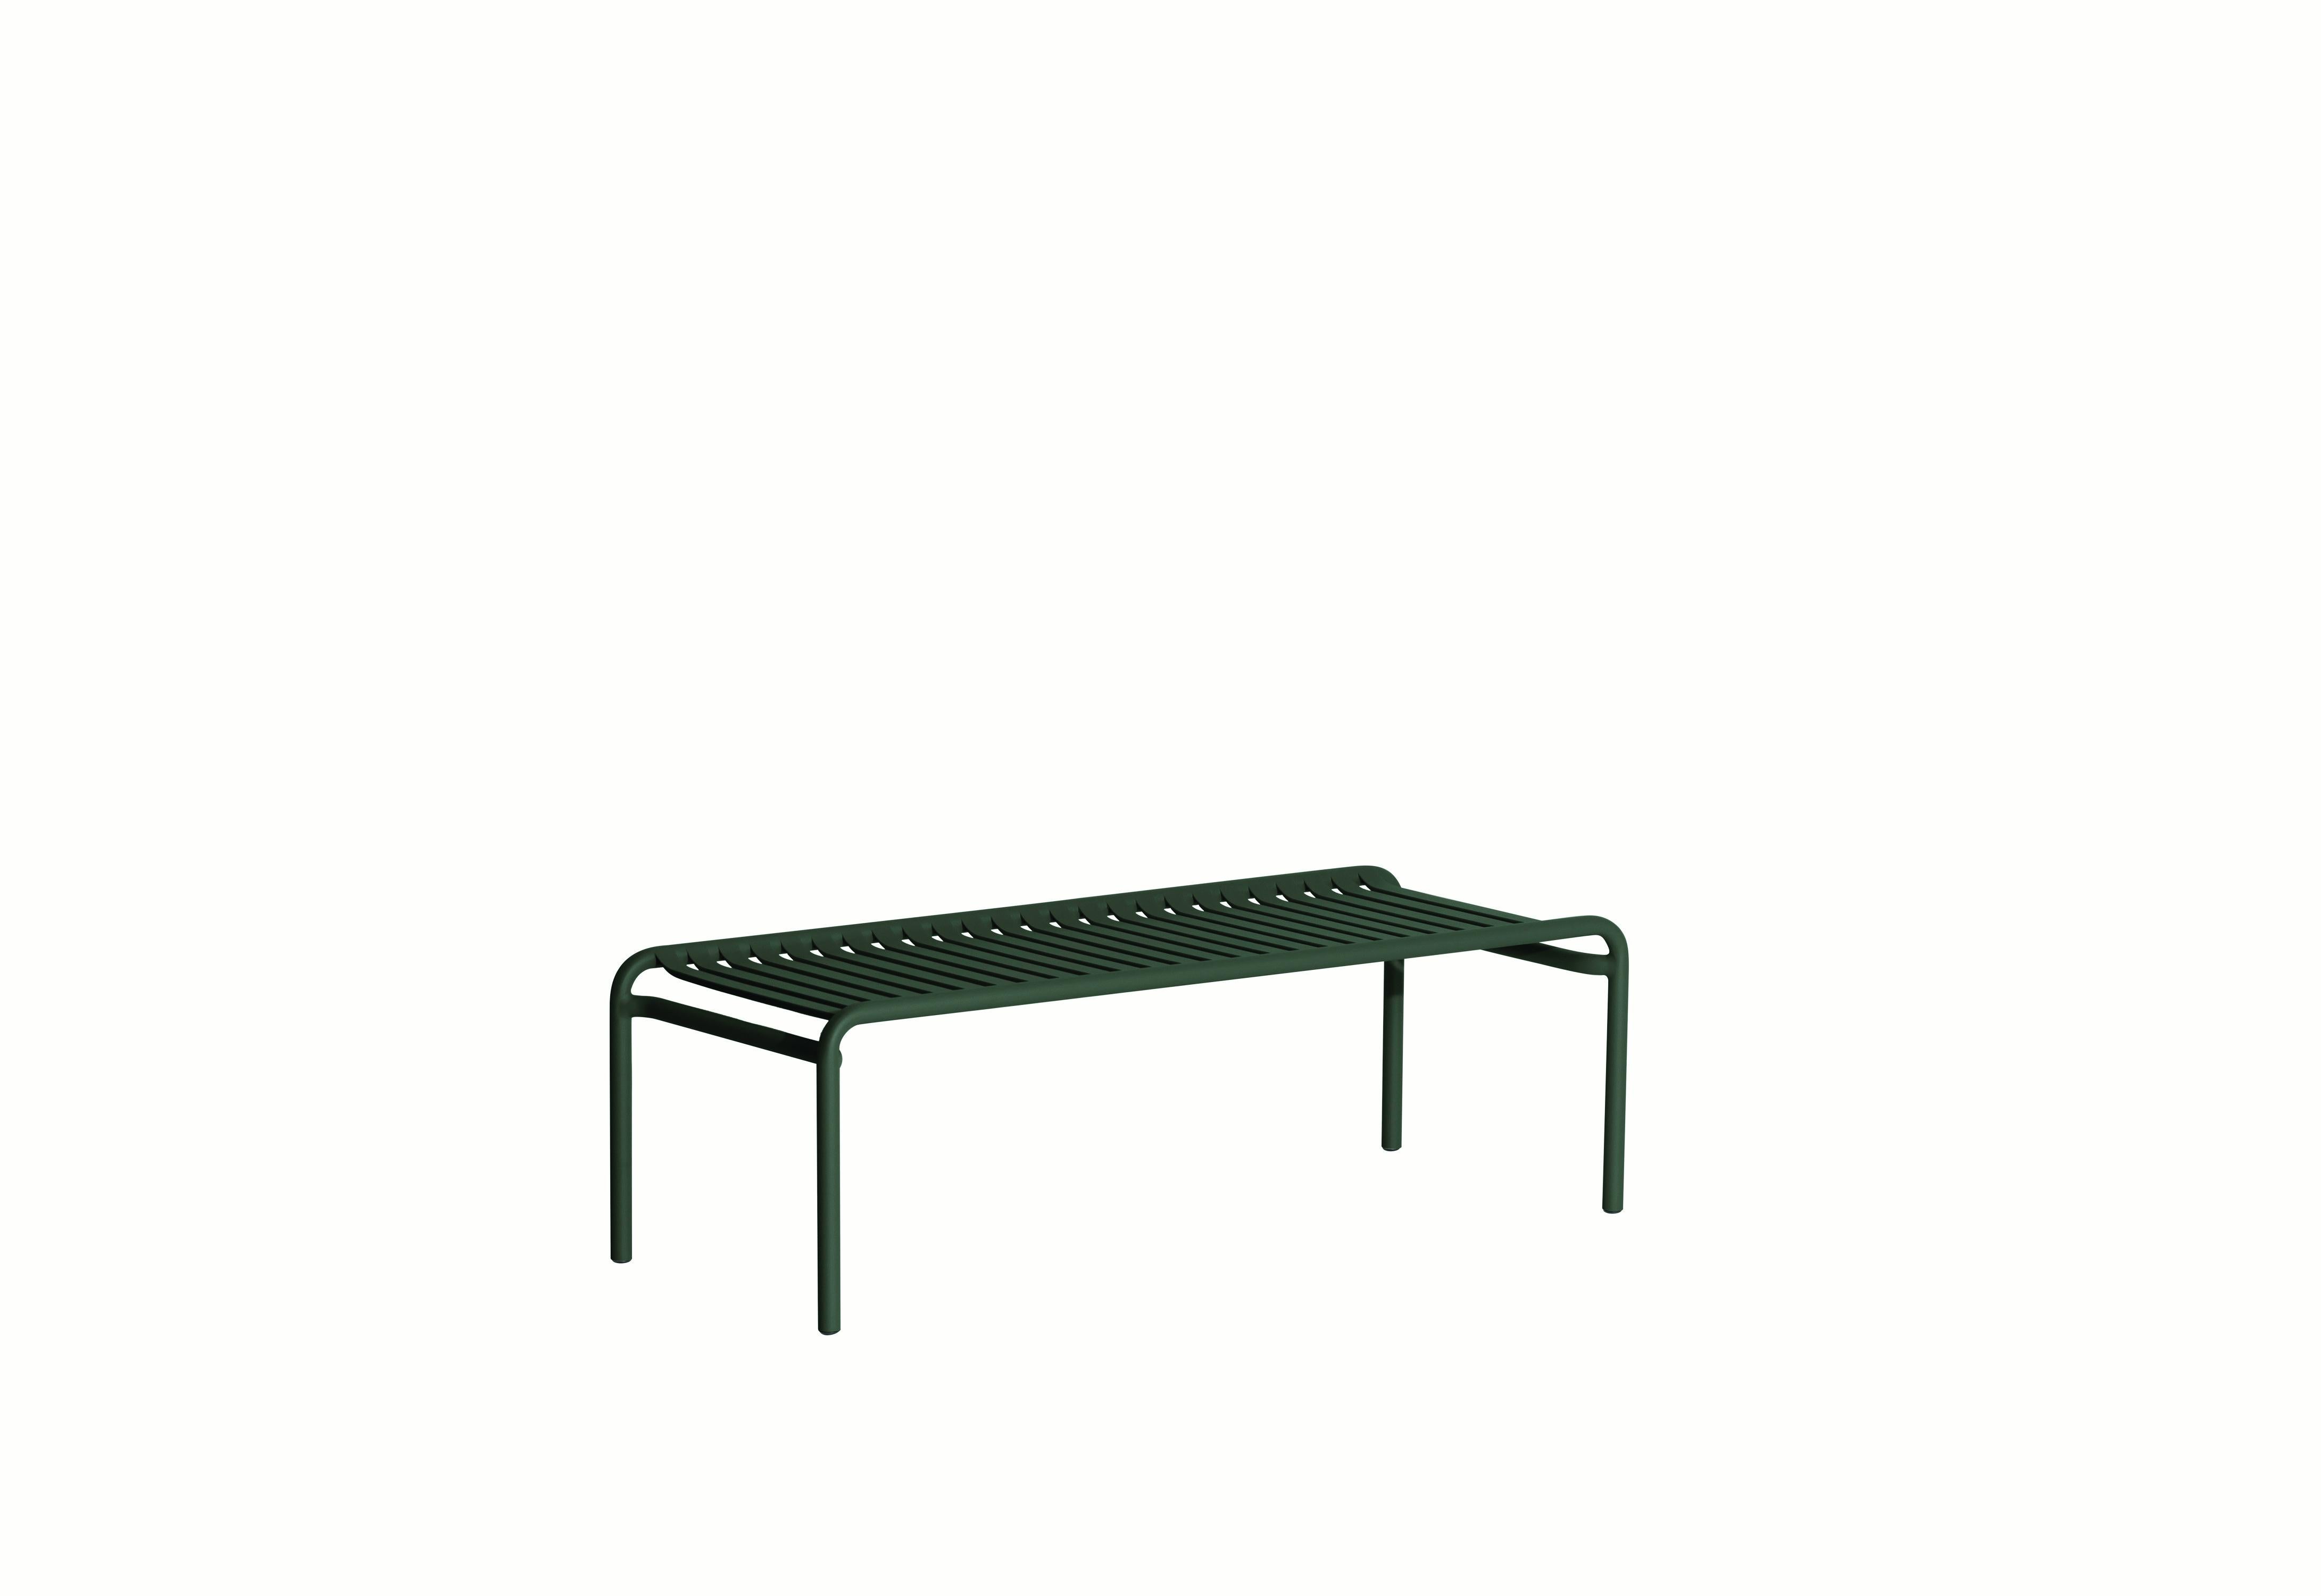 Petite Friture Week-End Long Coffee Table in Glass Green Aluminium by Studio BrichetZiegler, 2017

The week-end collection is a full range of outdoor furniture, in aluminium grained epoxy paint, matt finish, that includes 18 functions and 8